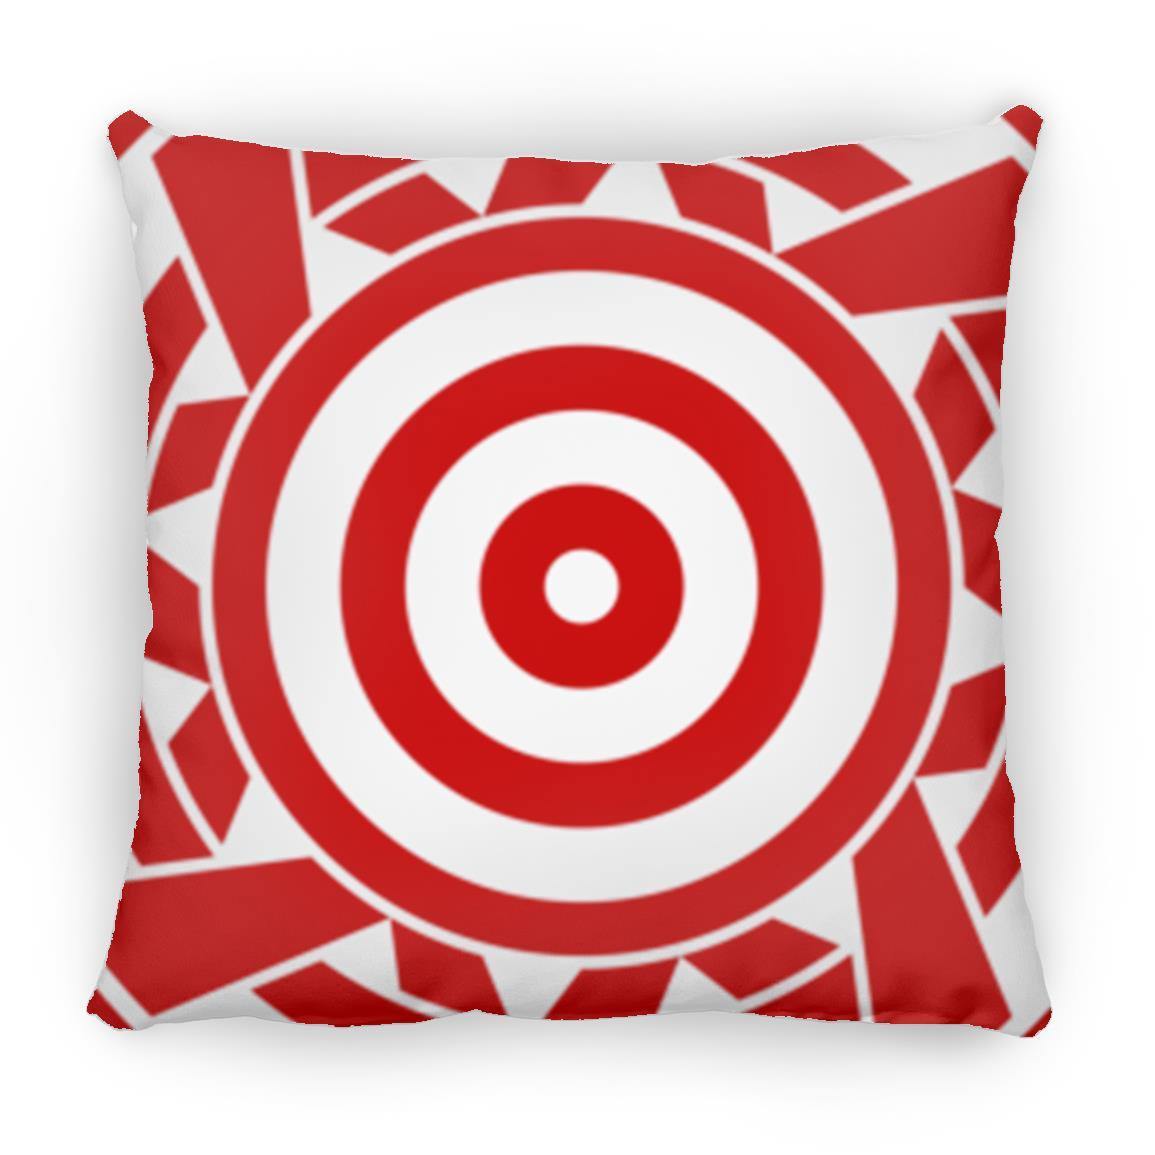 Crop Circle Pillow - Ammersee - Shapes of Wisdom